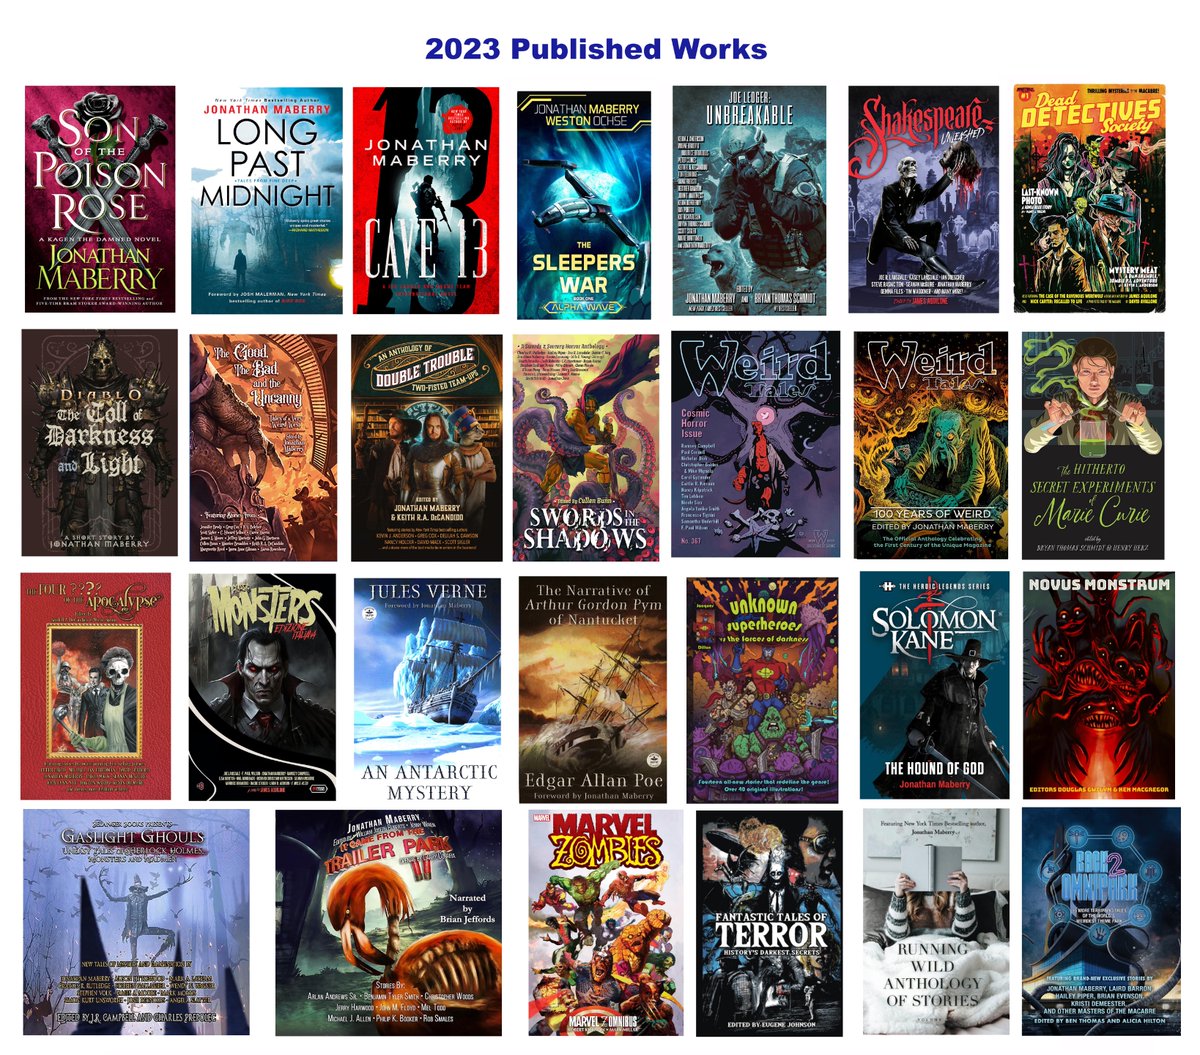 The FINAL tally for works published in 2023. They include novels, short story collections, anthologies I've edited, anthologies in which I have stories, magazines I've edited, books for which I've written forewords, and comics. @Marvel @AethonBooks @blackstonepub @MacmillanUSA